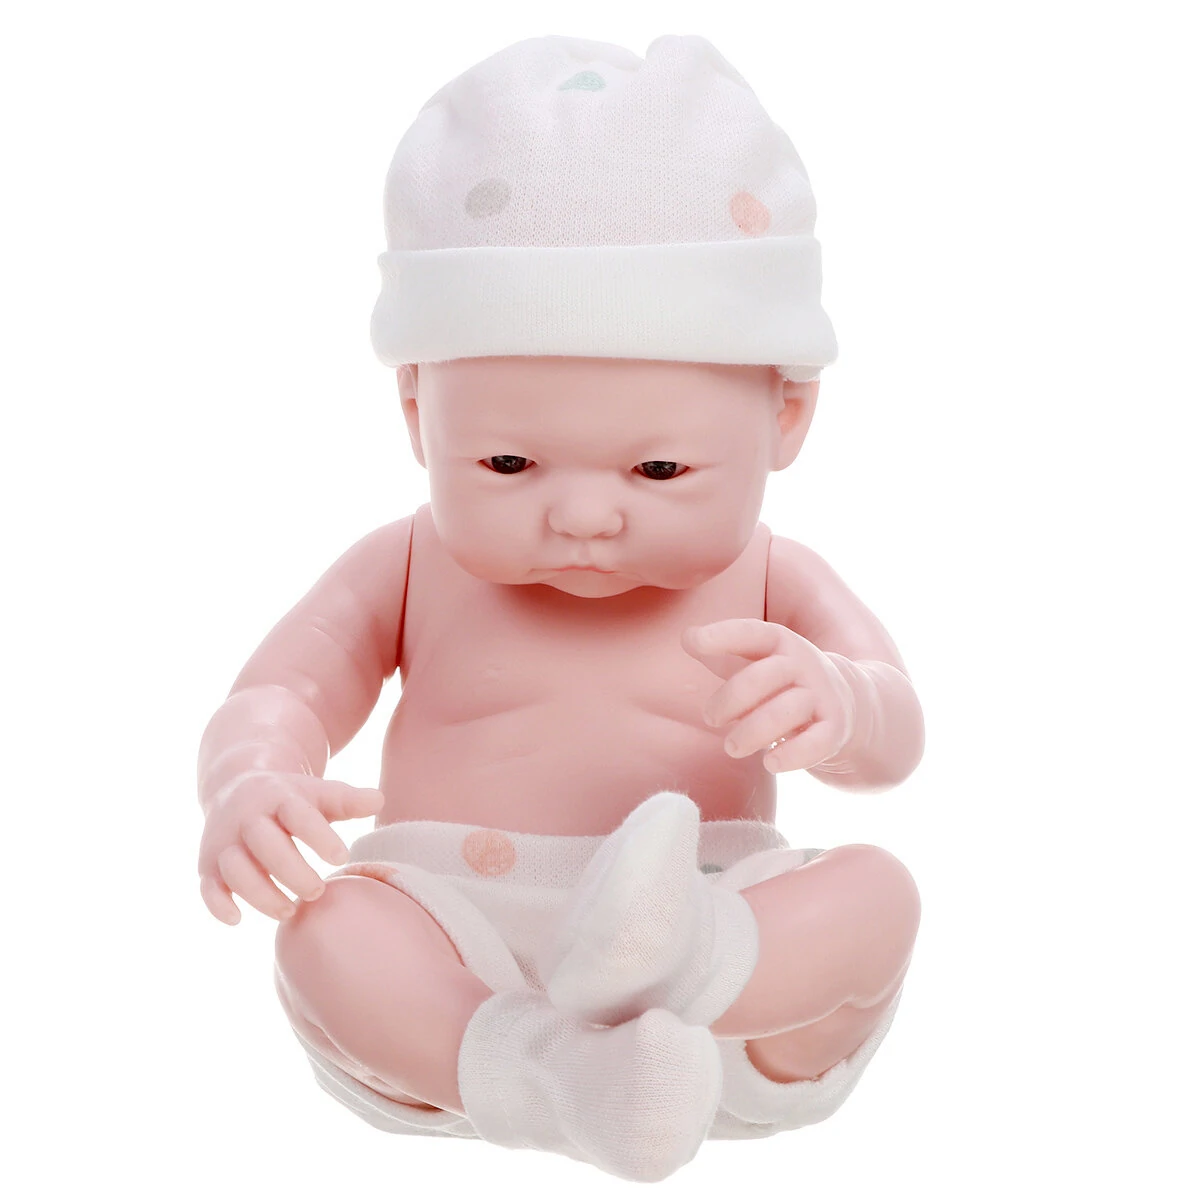 9.5inch Baby Doll Real Life Soft Silicone Doll Baby Girl Realistic Handmade Baby Doll Toy - C